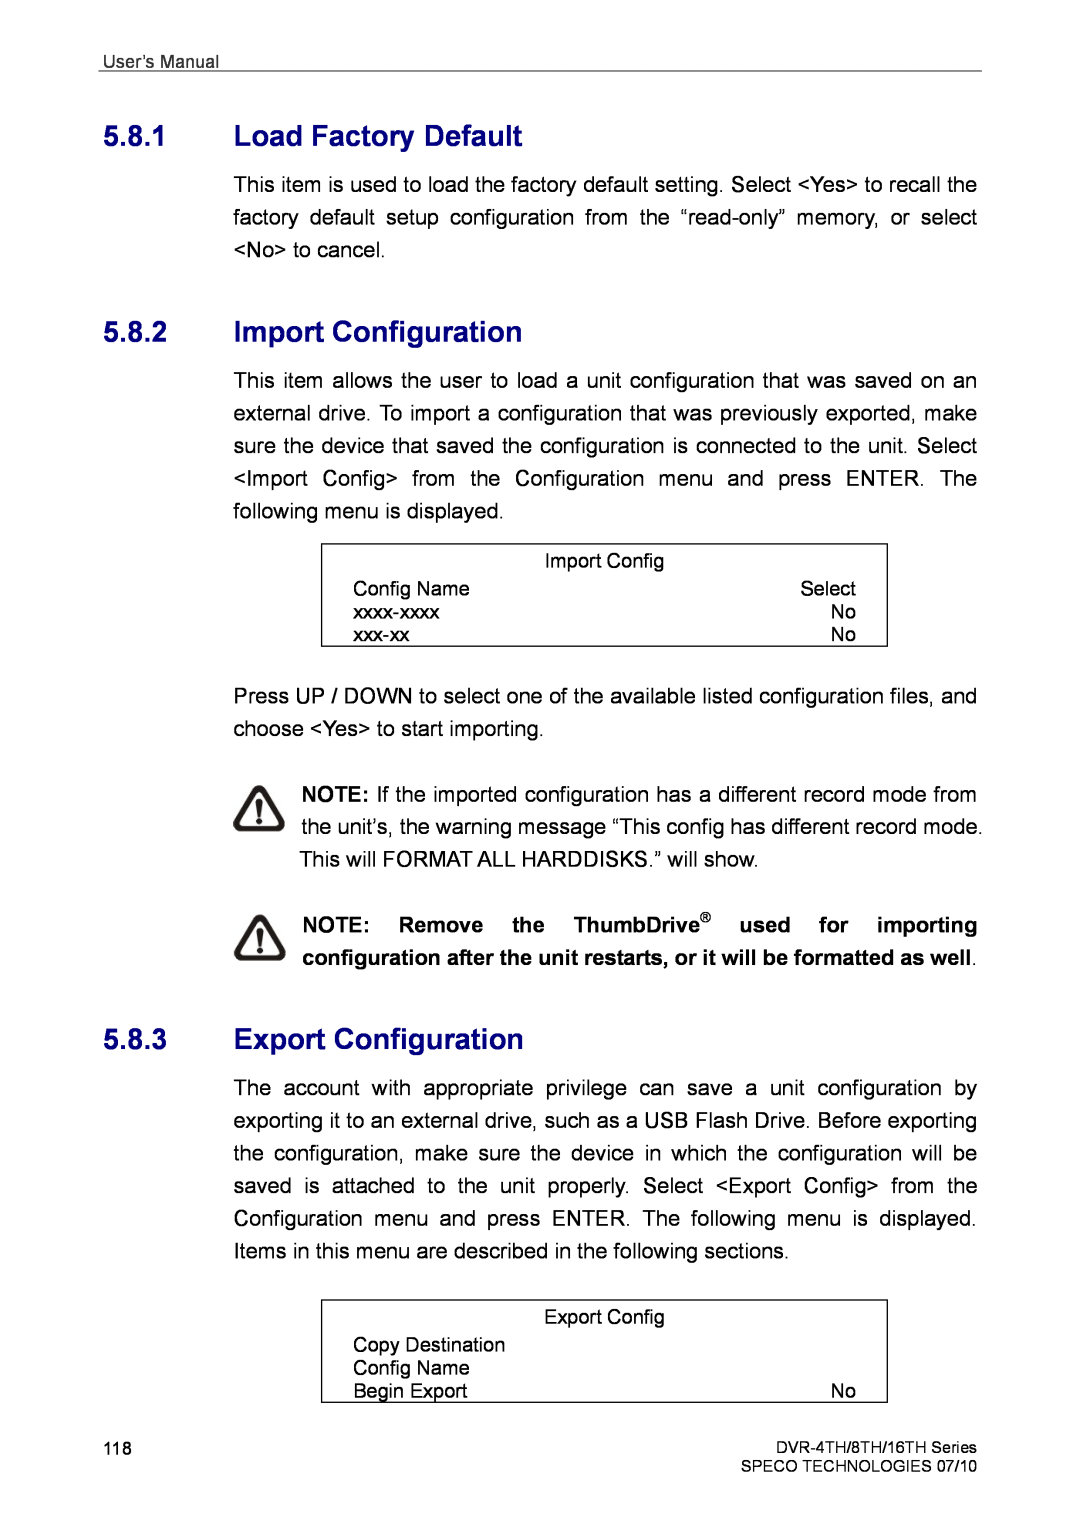 Speco Technologies 16TH, 8TH, 4TH user manual Load Factory Default, Import Configuration, Export Configuration 